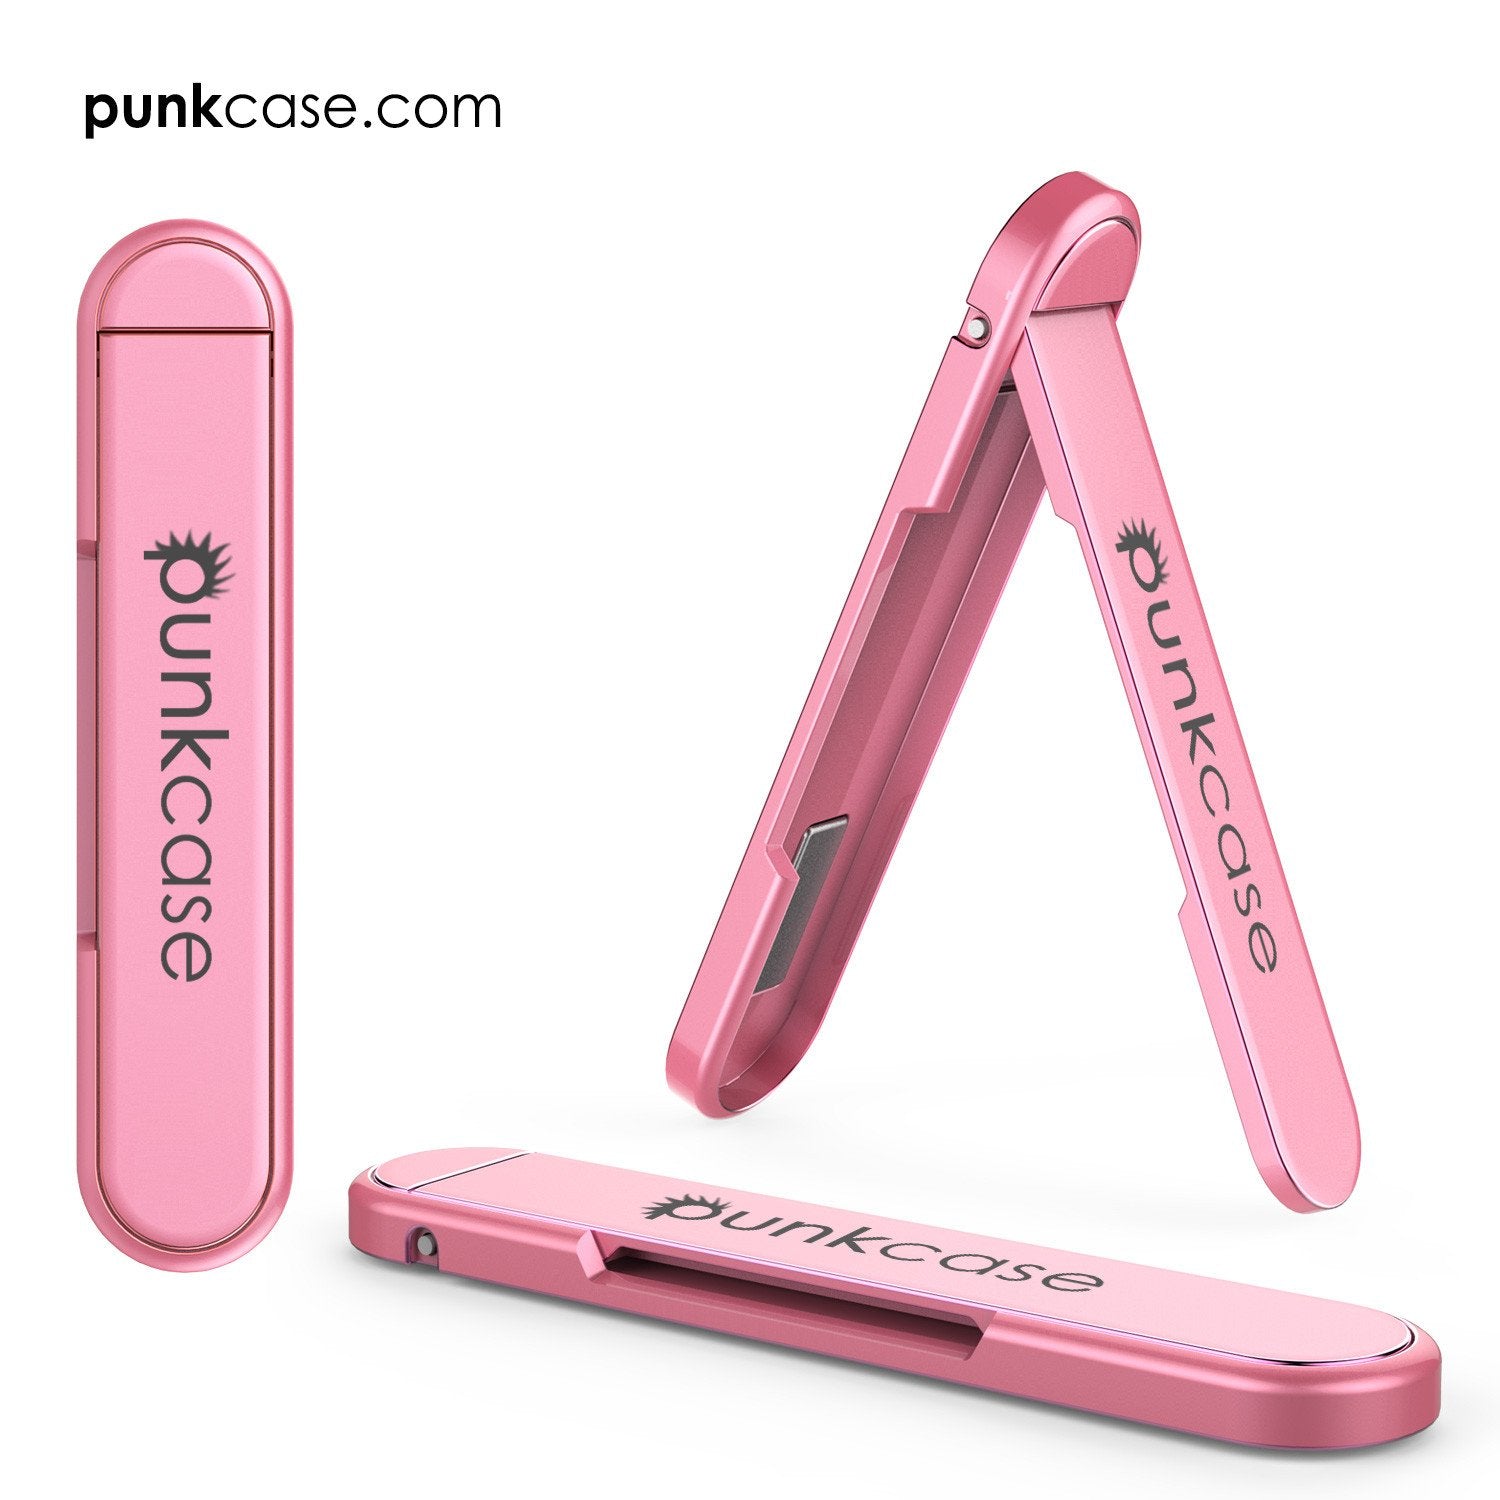 PUNKCASE FlickStick Universal Cell Phone Kickstand for all Mobile Phones & Cases with Flat Backs, One Finger Operation (Pink)